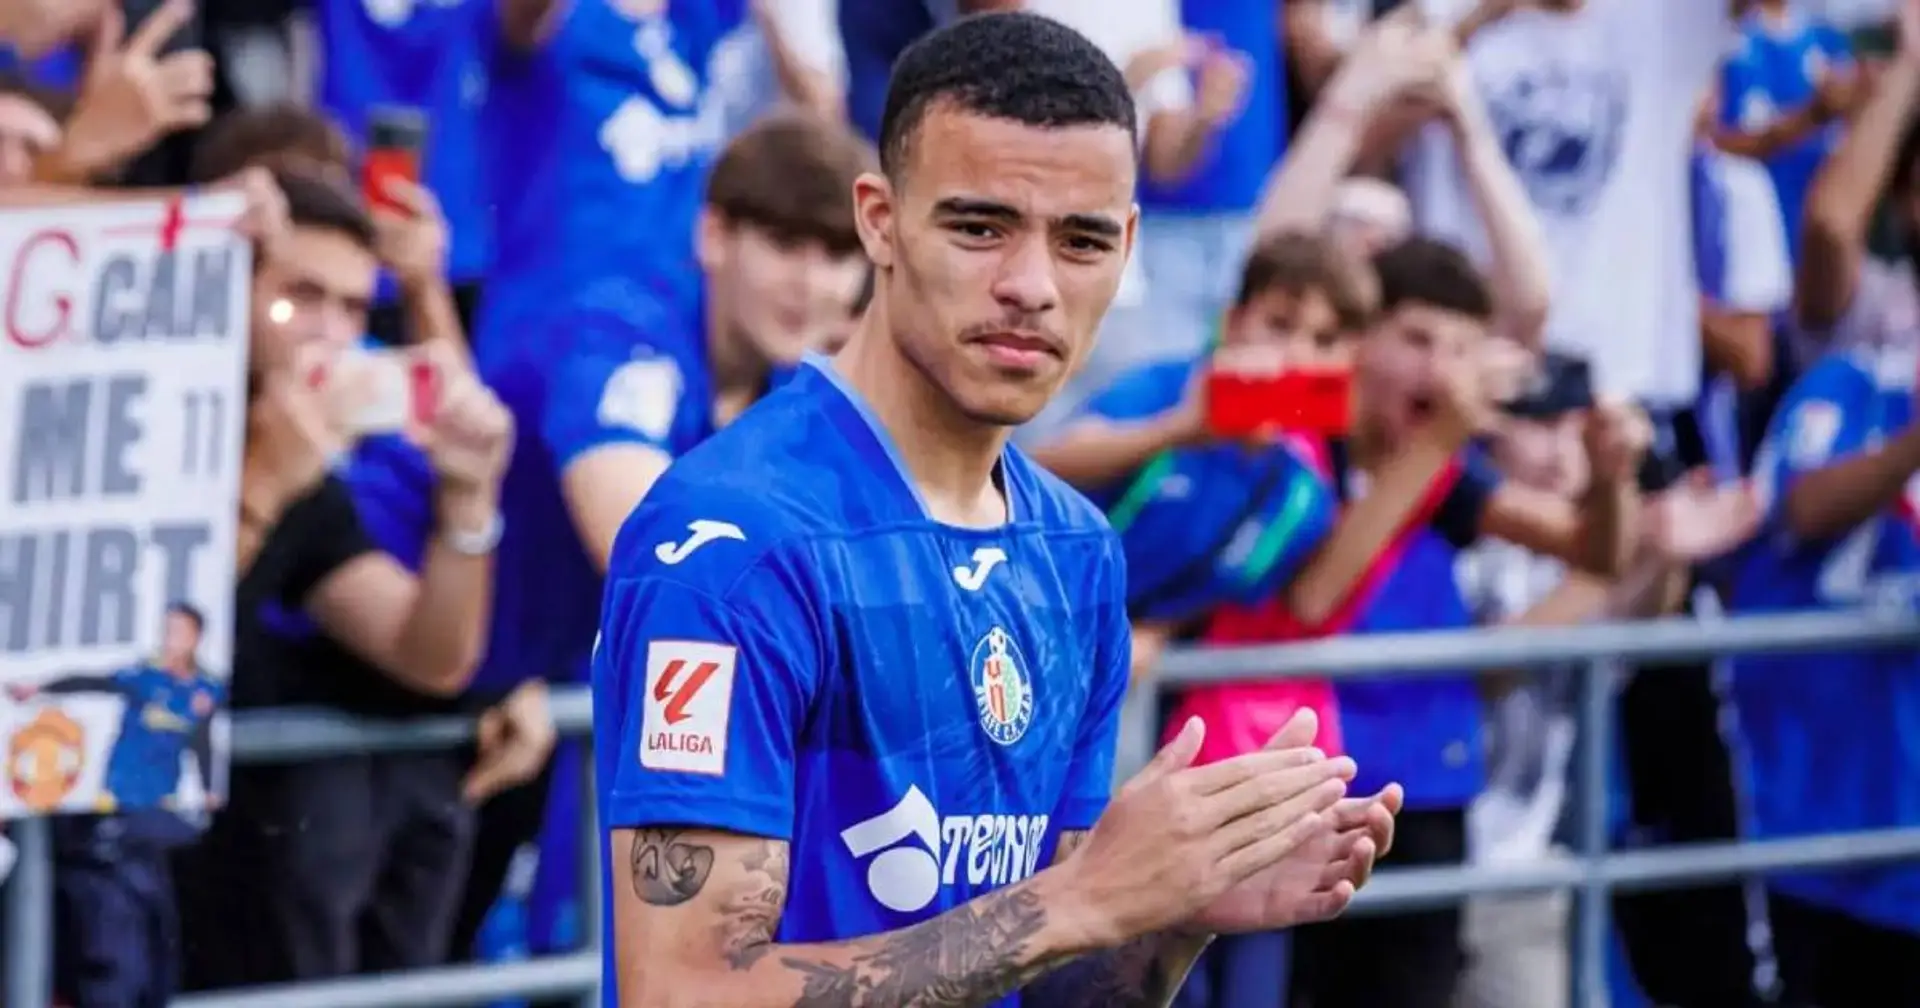 'Barca's style would suit him': Getafe president confirms La Liga clubs' interest in Greenwood 